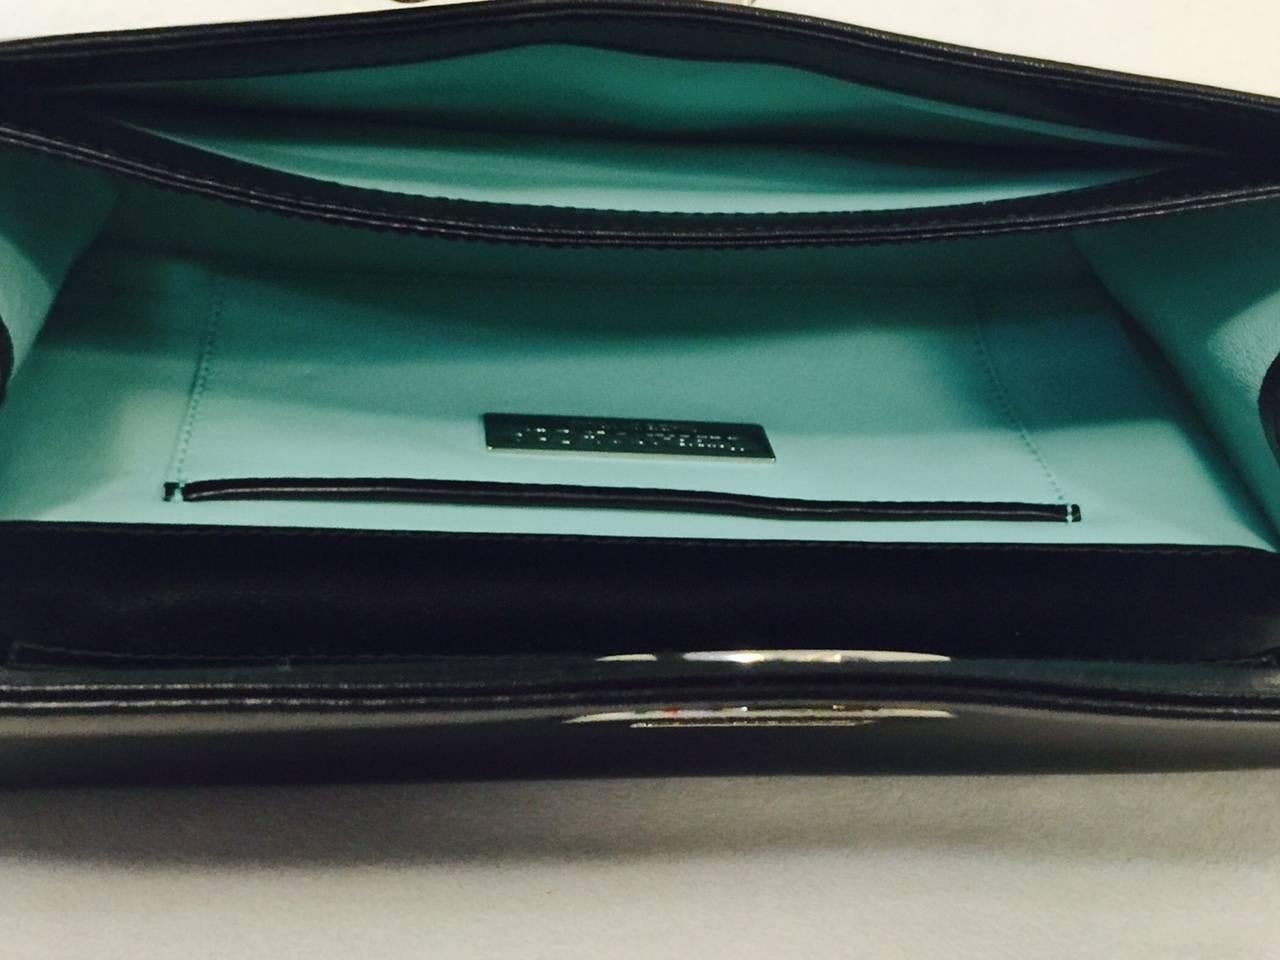 Tiffany & Co. Black Polished Calfskin Large City Clutch Above Excellent  3